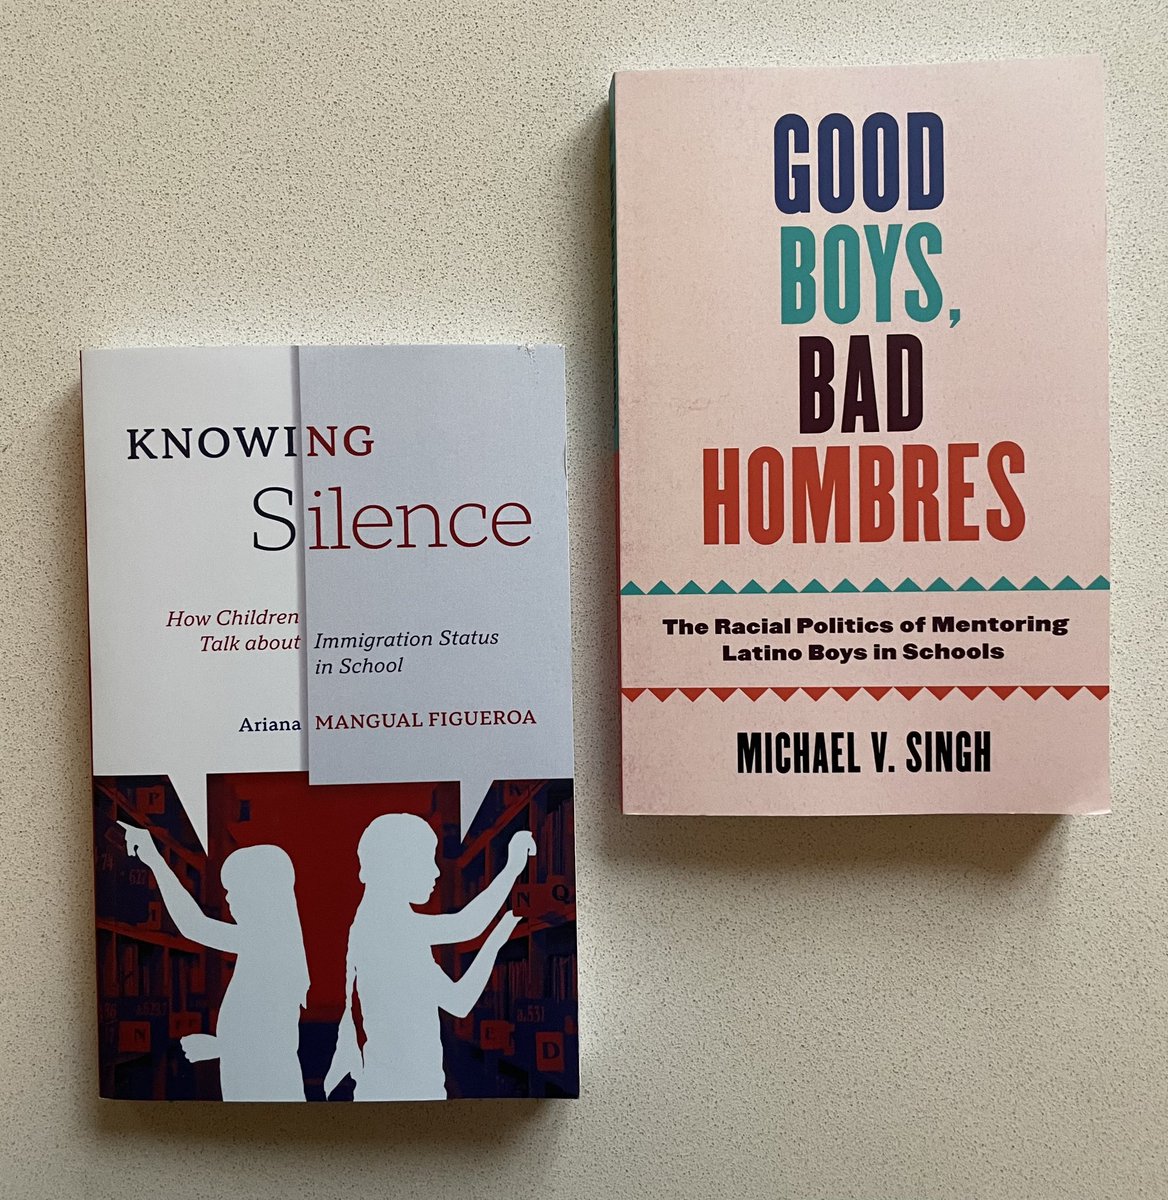 I’m very excited with my conference book purchases. Looking forward to reading and learning from these important @UMinnPress books by @MichaelVSingh and Ariana Mangual Figueroa!